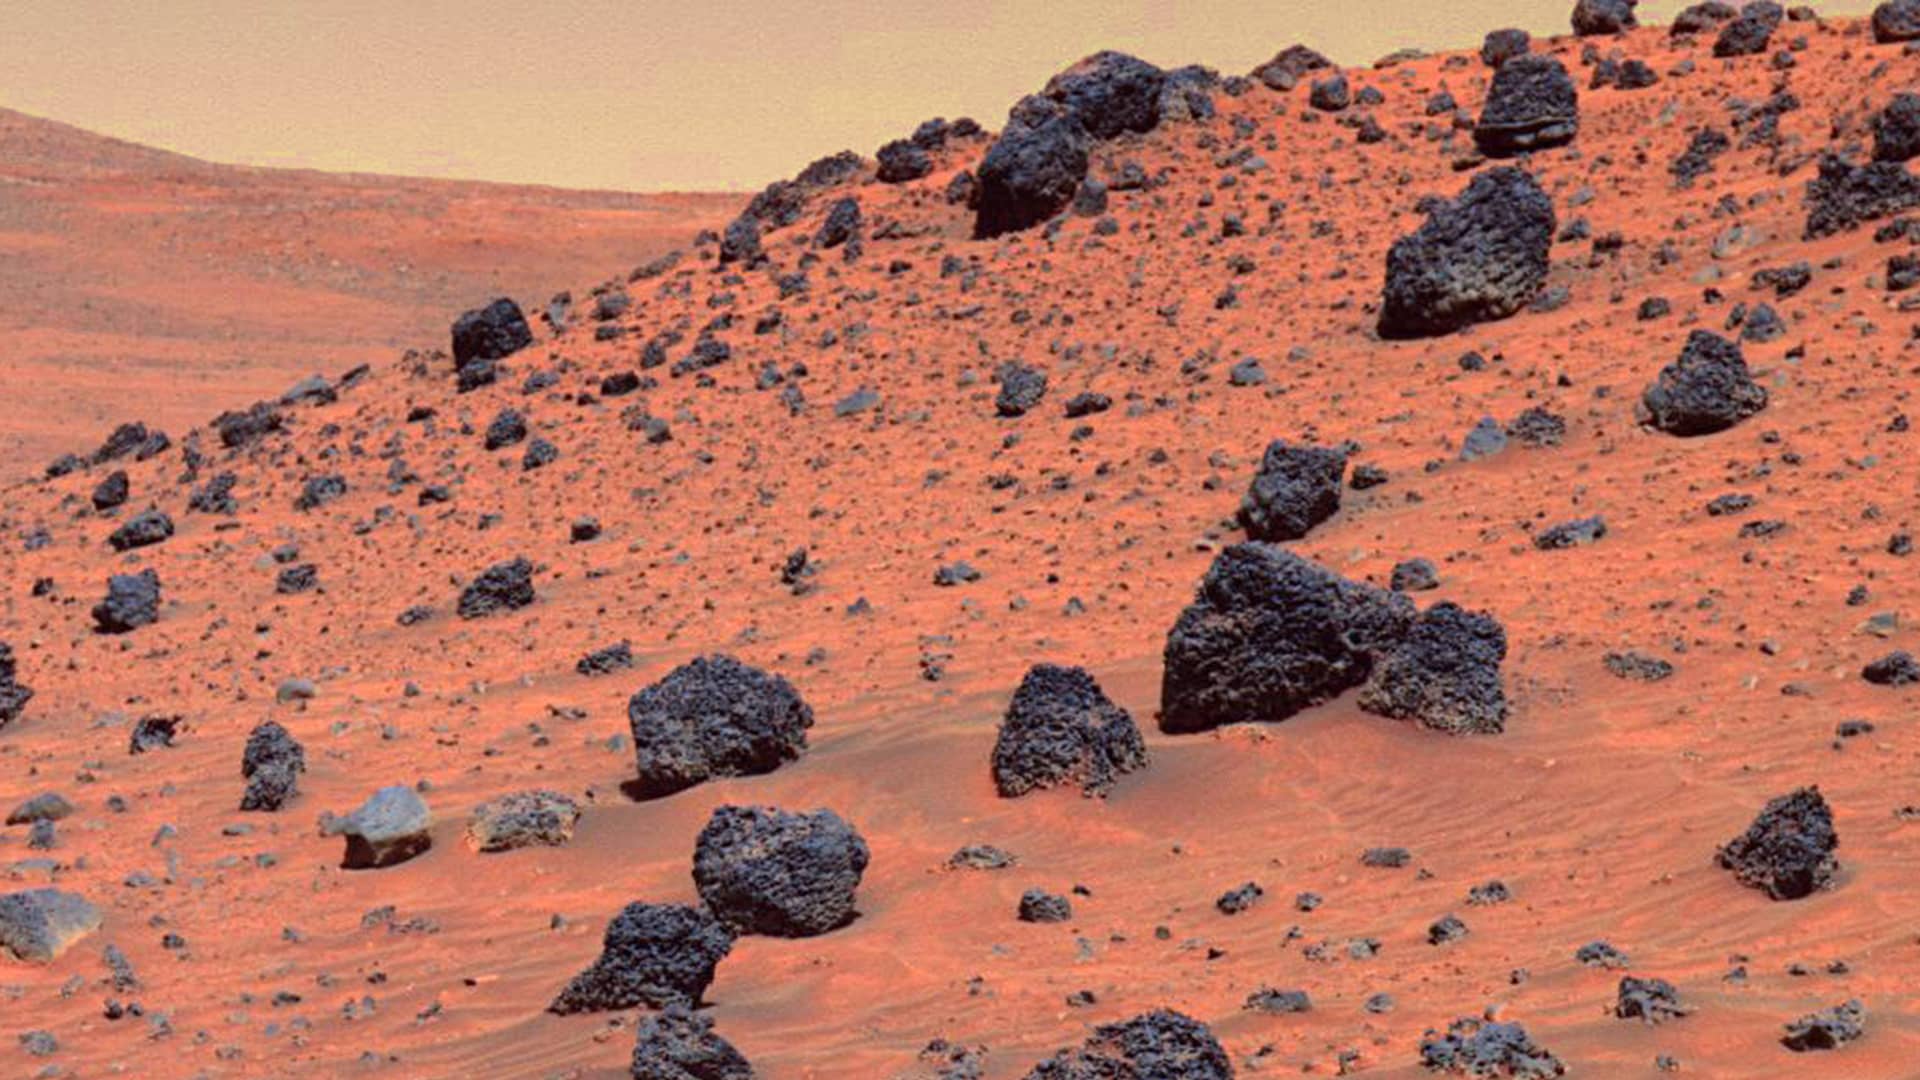 Why is Mars red?